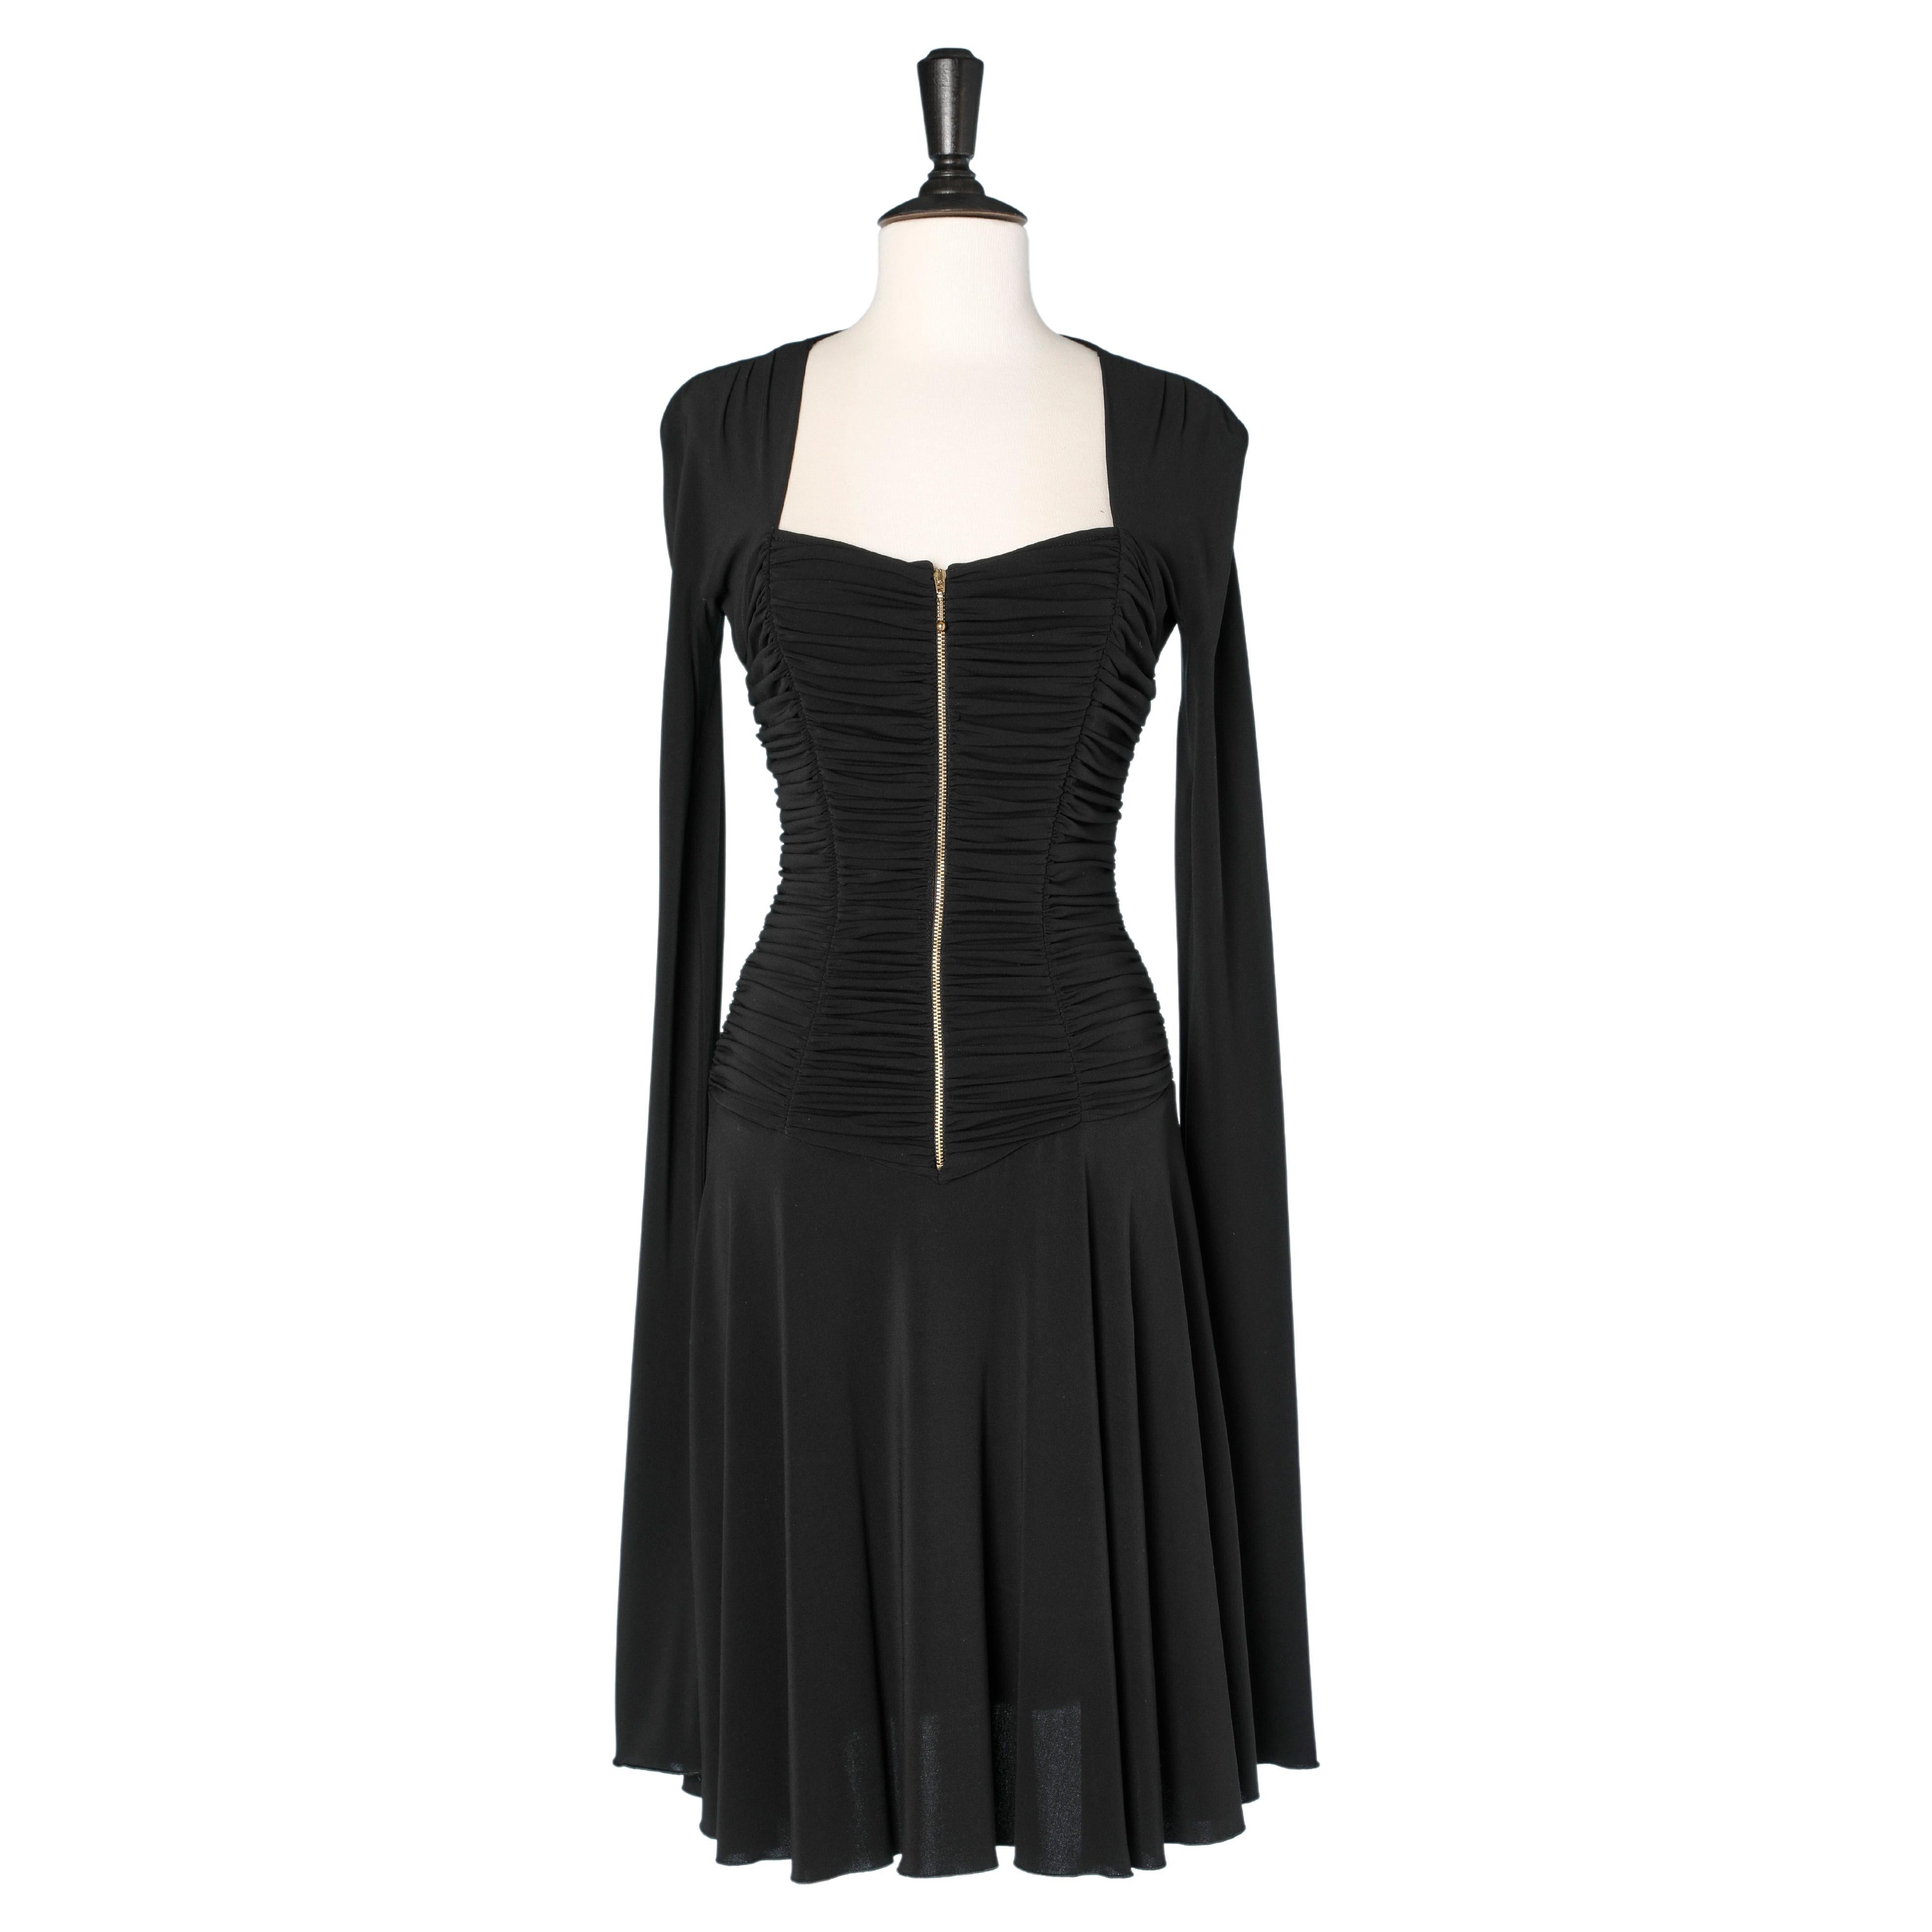 Black draped cocktail dress with zip in the middle front Luisa Spagnoli  For Sale